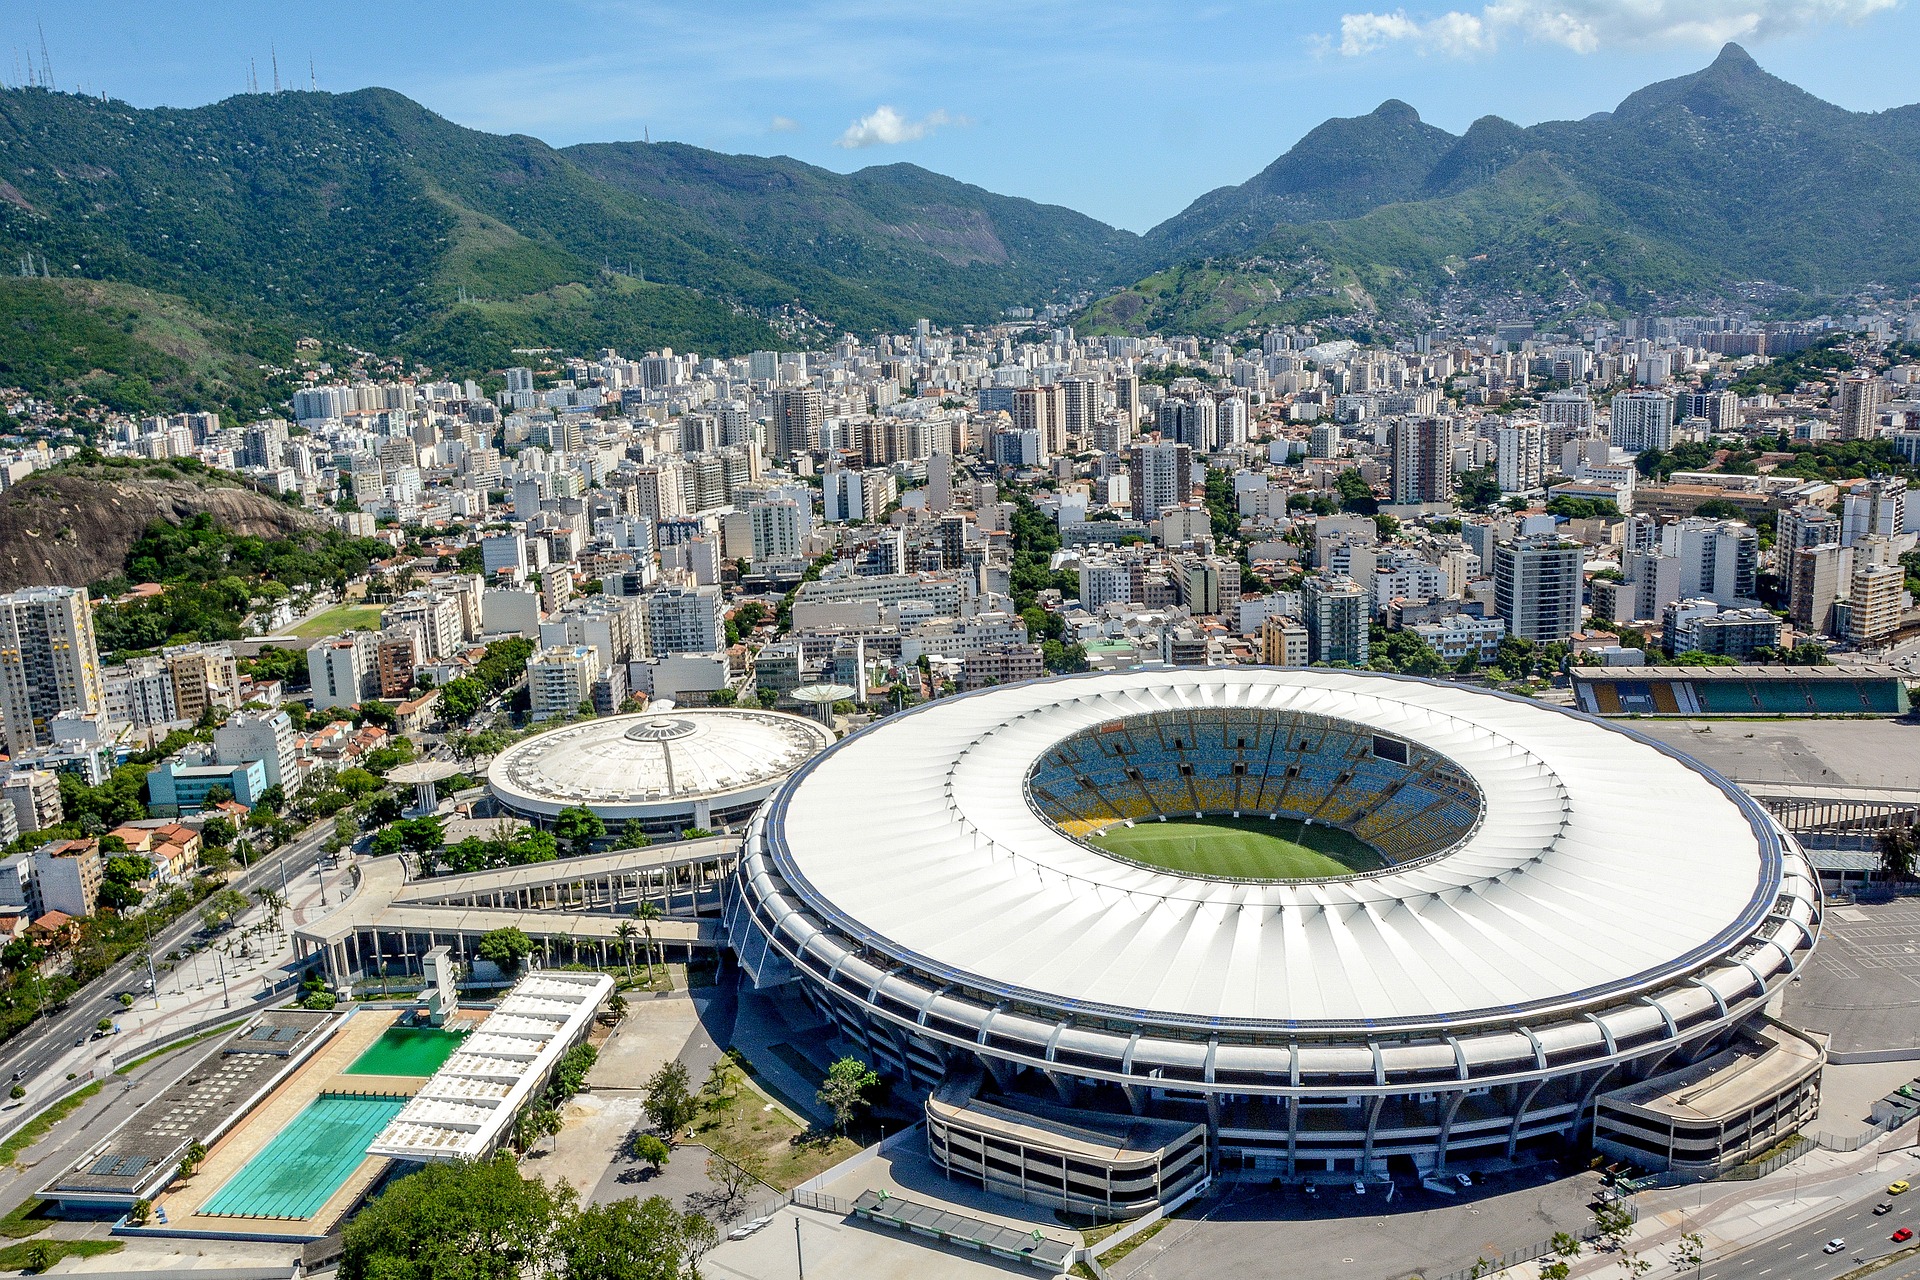 Embark on a private tour and discover the iconic Maracanã Stadium, immersing yourself in the rich history and electric atmosphere of one of the world's most renowned football arenas. 